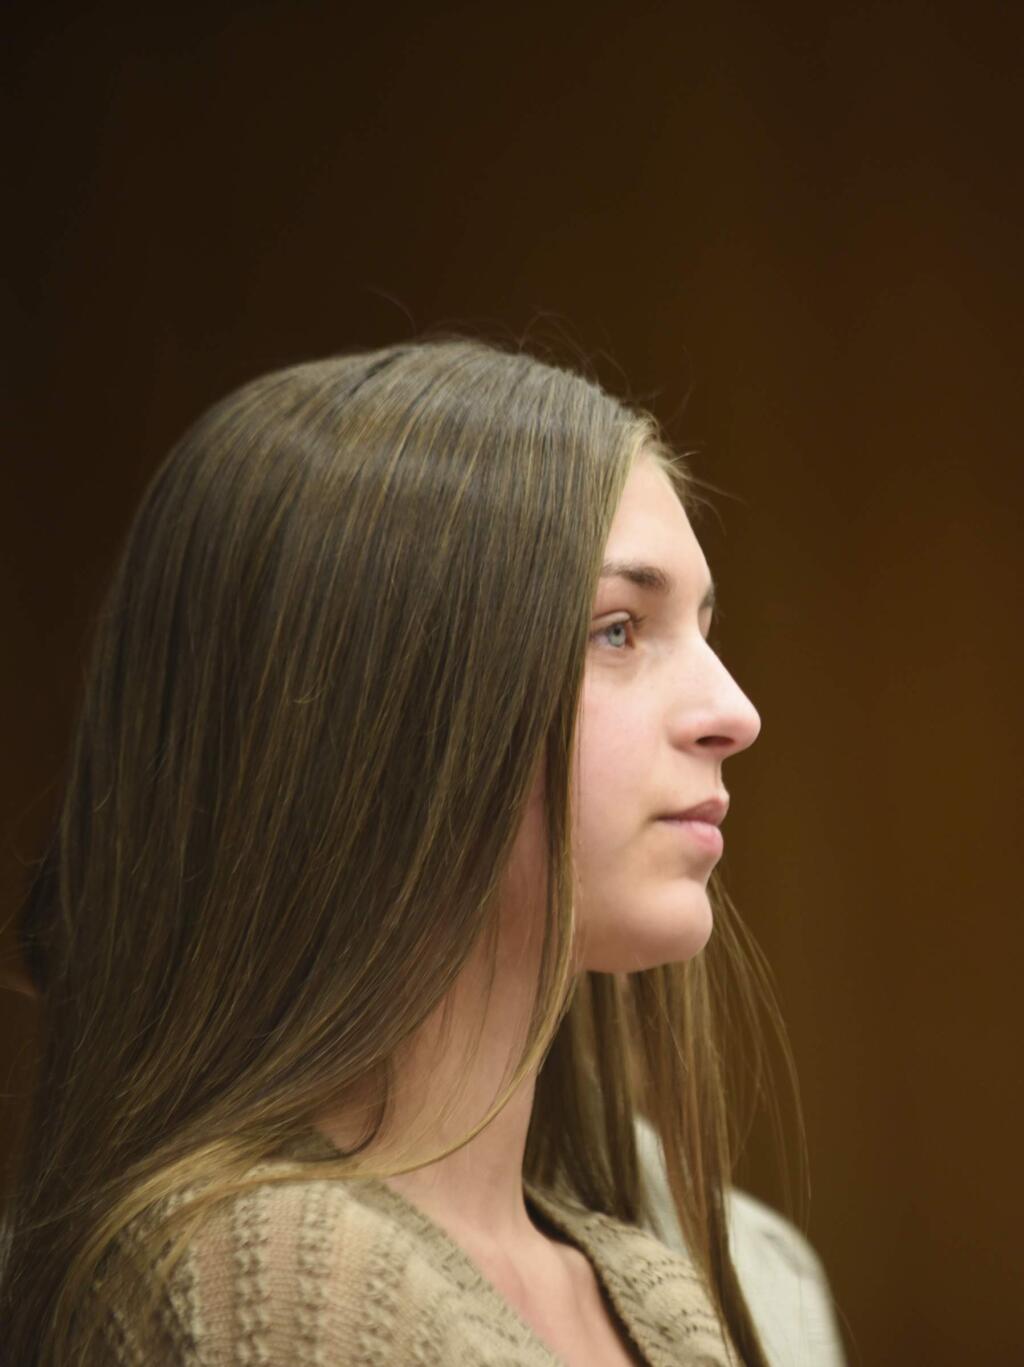 Mya Covey, a minor, gives her victim impact statement Wednesday, Jan. 31, 2018, during the first day of statements in Eaton County Circuit Court in Charlotte, Mich., where Nassar is expected to be sentenced on three counts of sexual assault some time next week. (Matthew Dae Smith /Lansing State Journal via AP)